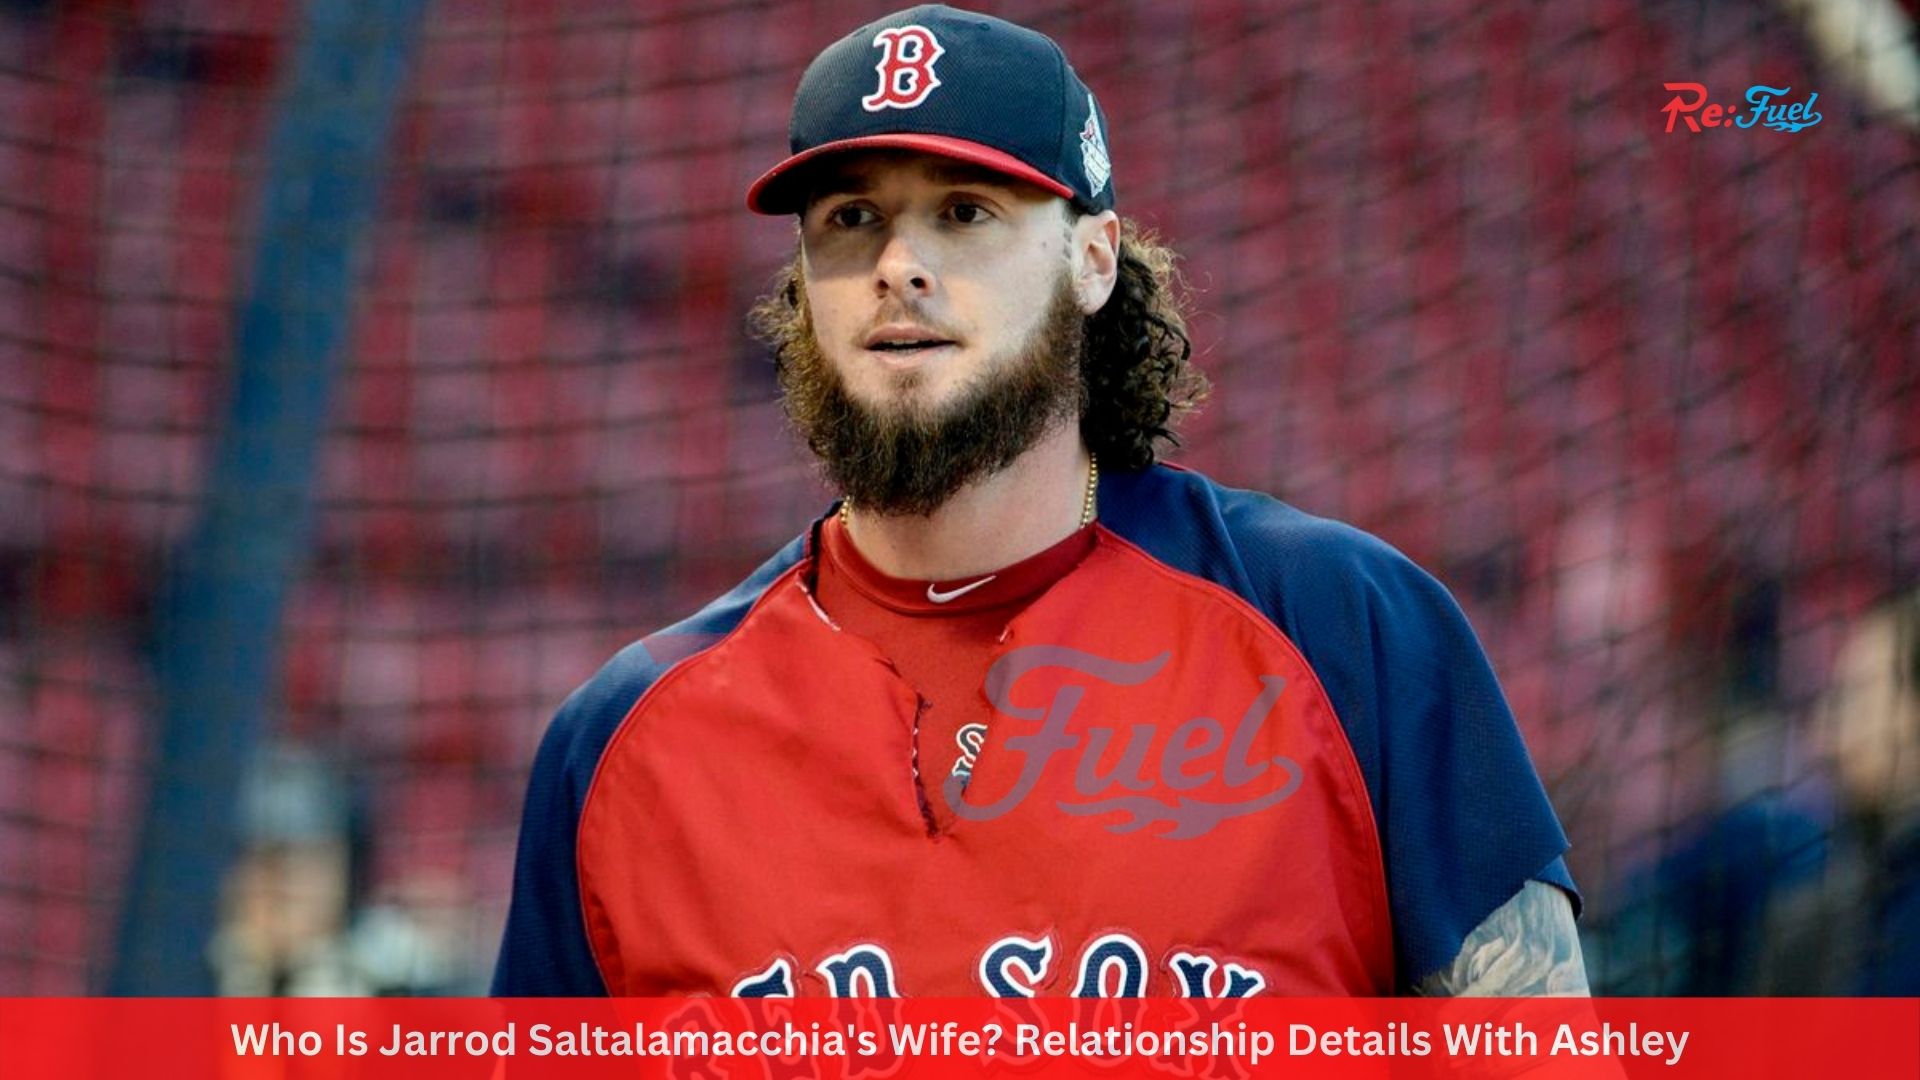 Who Is Jarrod Saltalamacchia's Wife? Relationship Details With Ashley